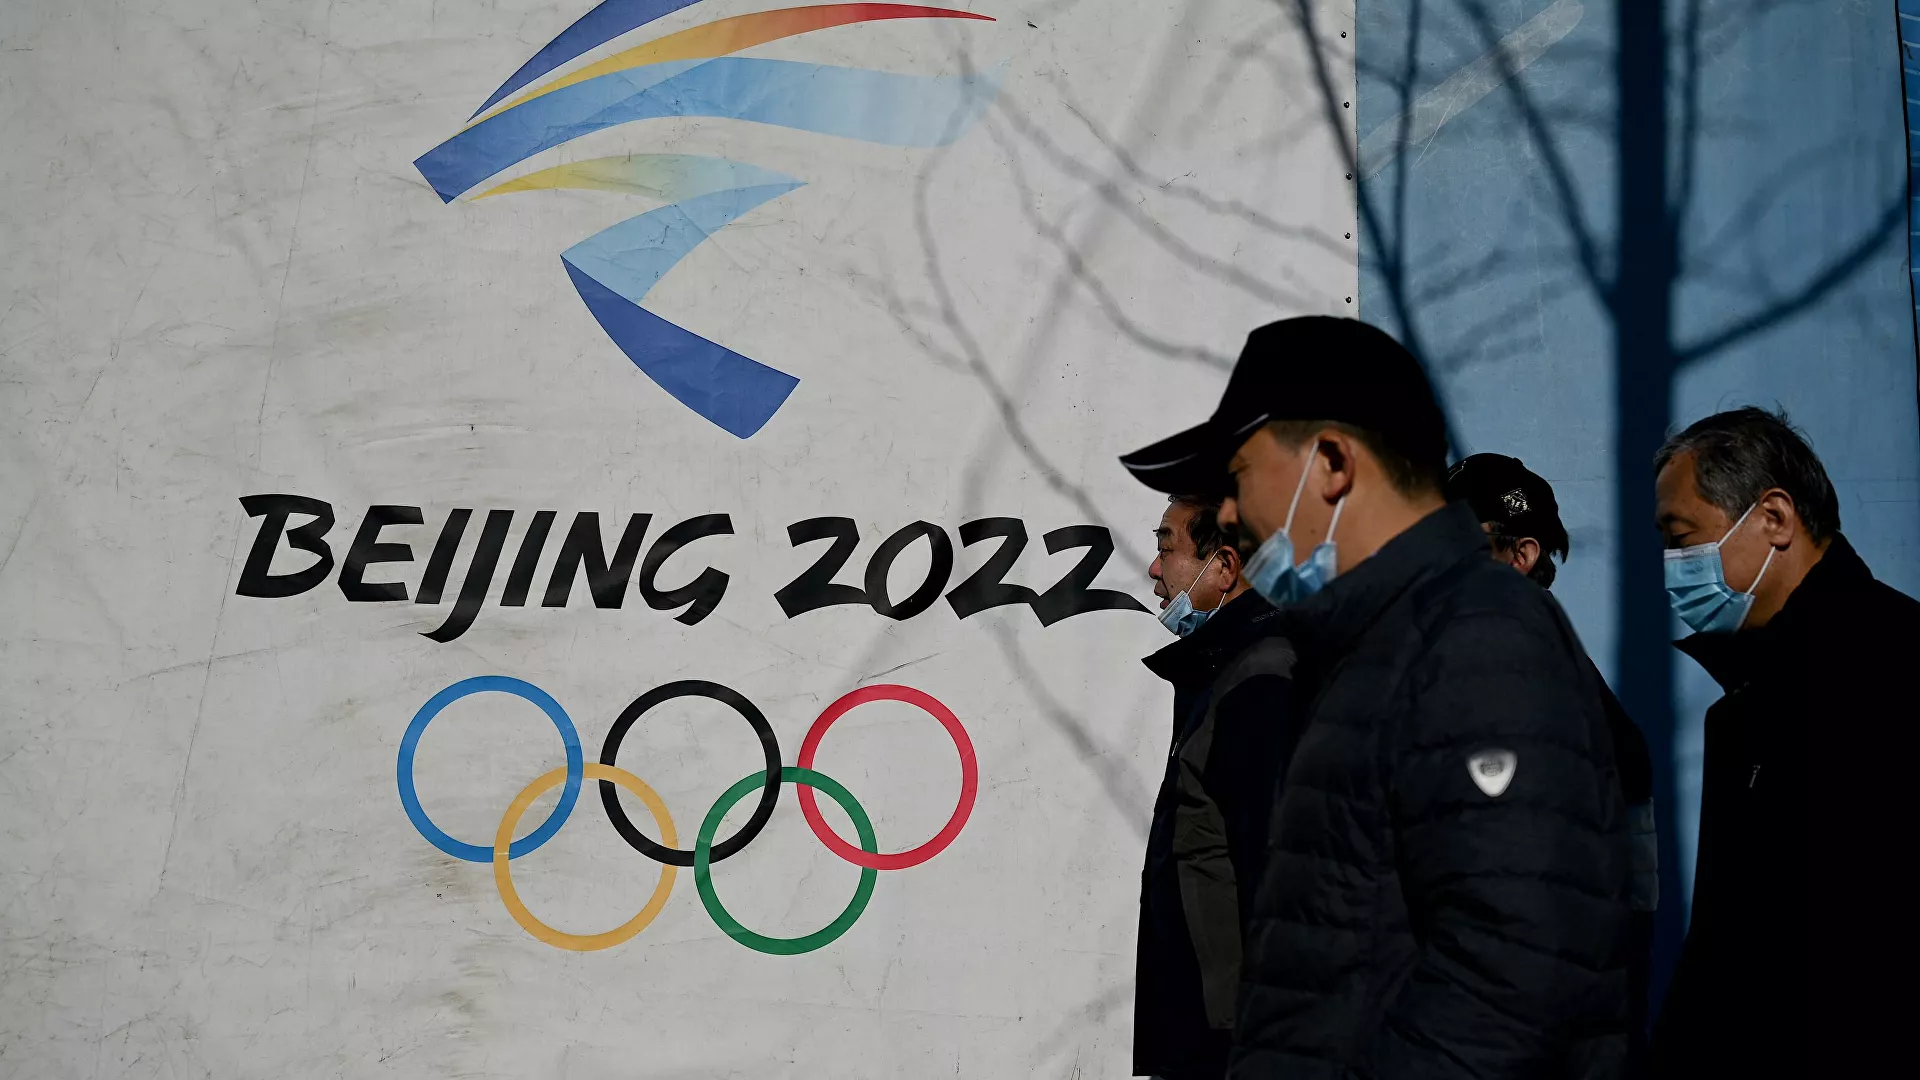 White House Confirms US Will Not Send Representation To 2022 Winter Olympics In Beijing